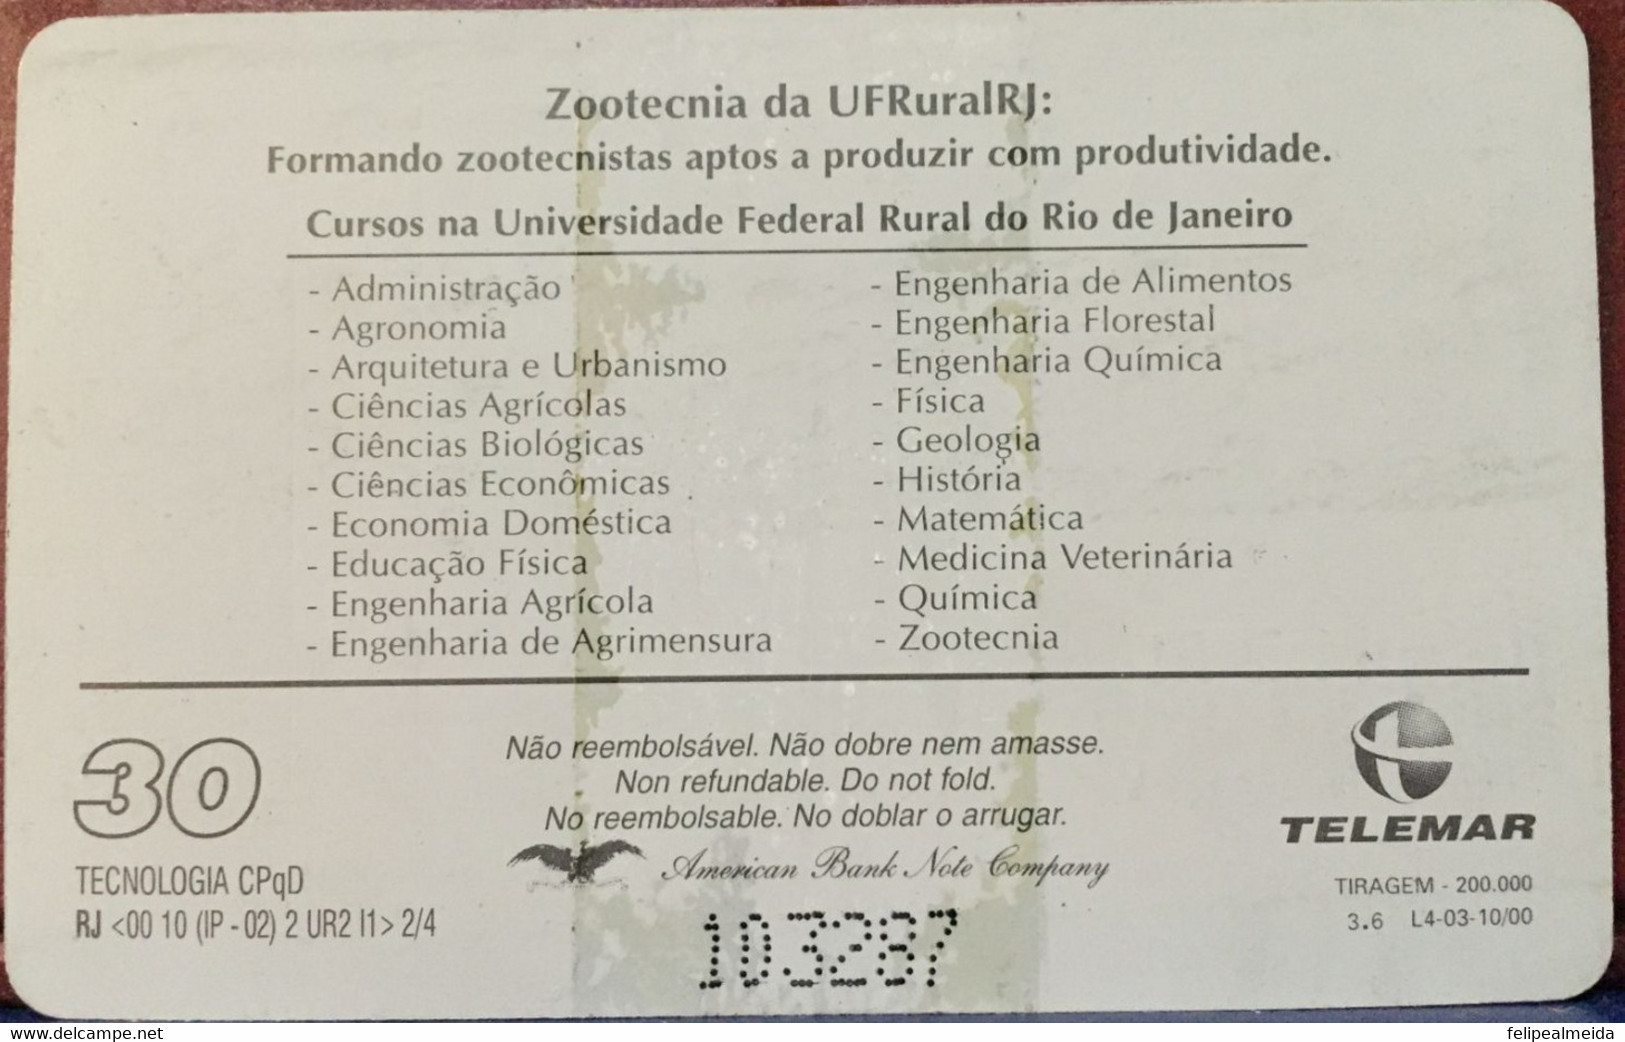 Phone Card Produced By Telemar In 2000 - Building Of The Animal Science Course At The Federal Rural University Of Rio De - Culture